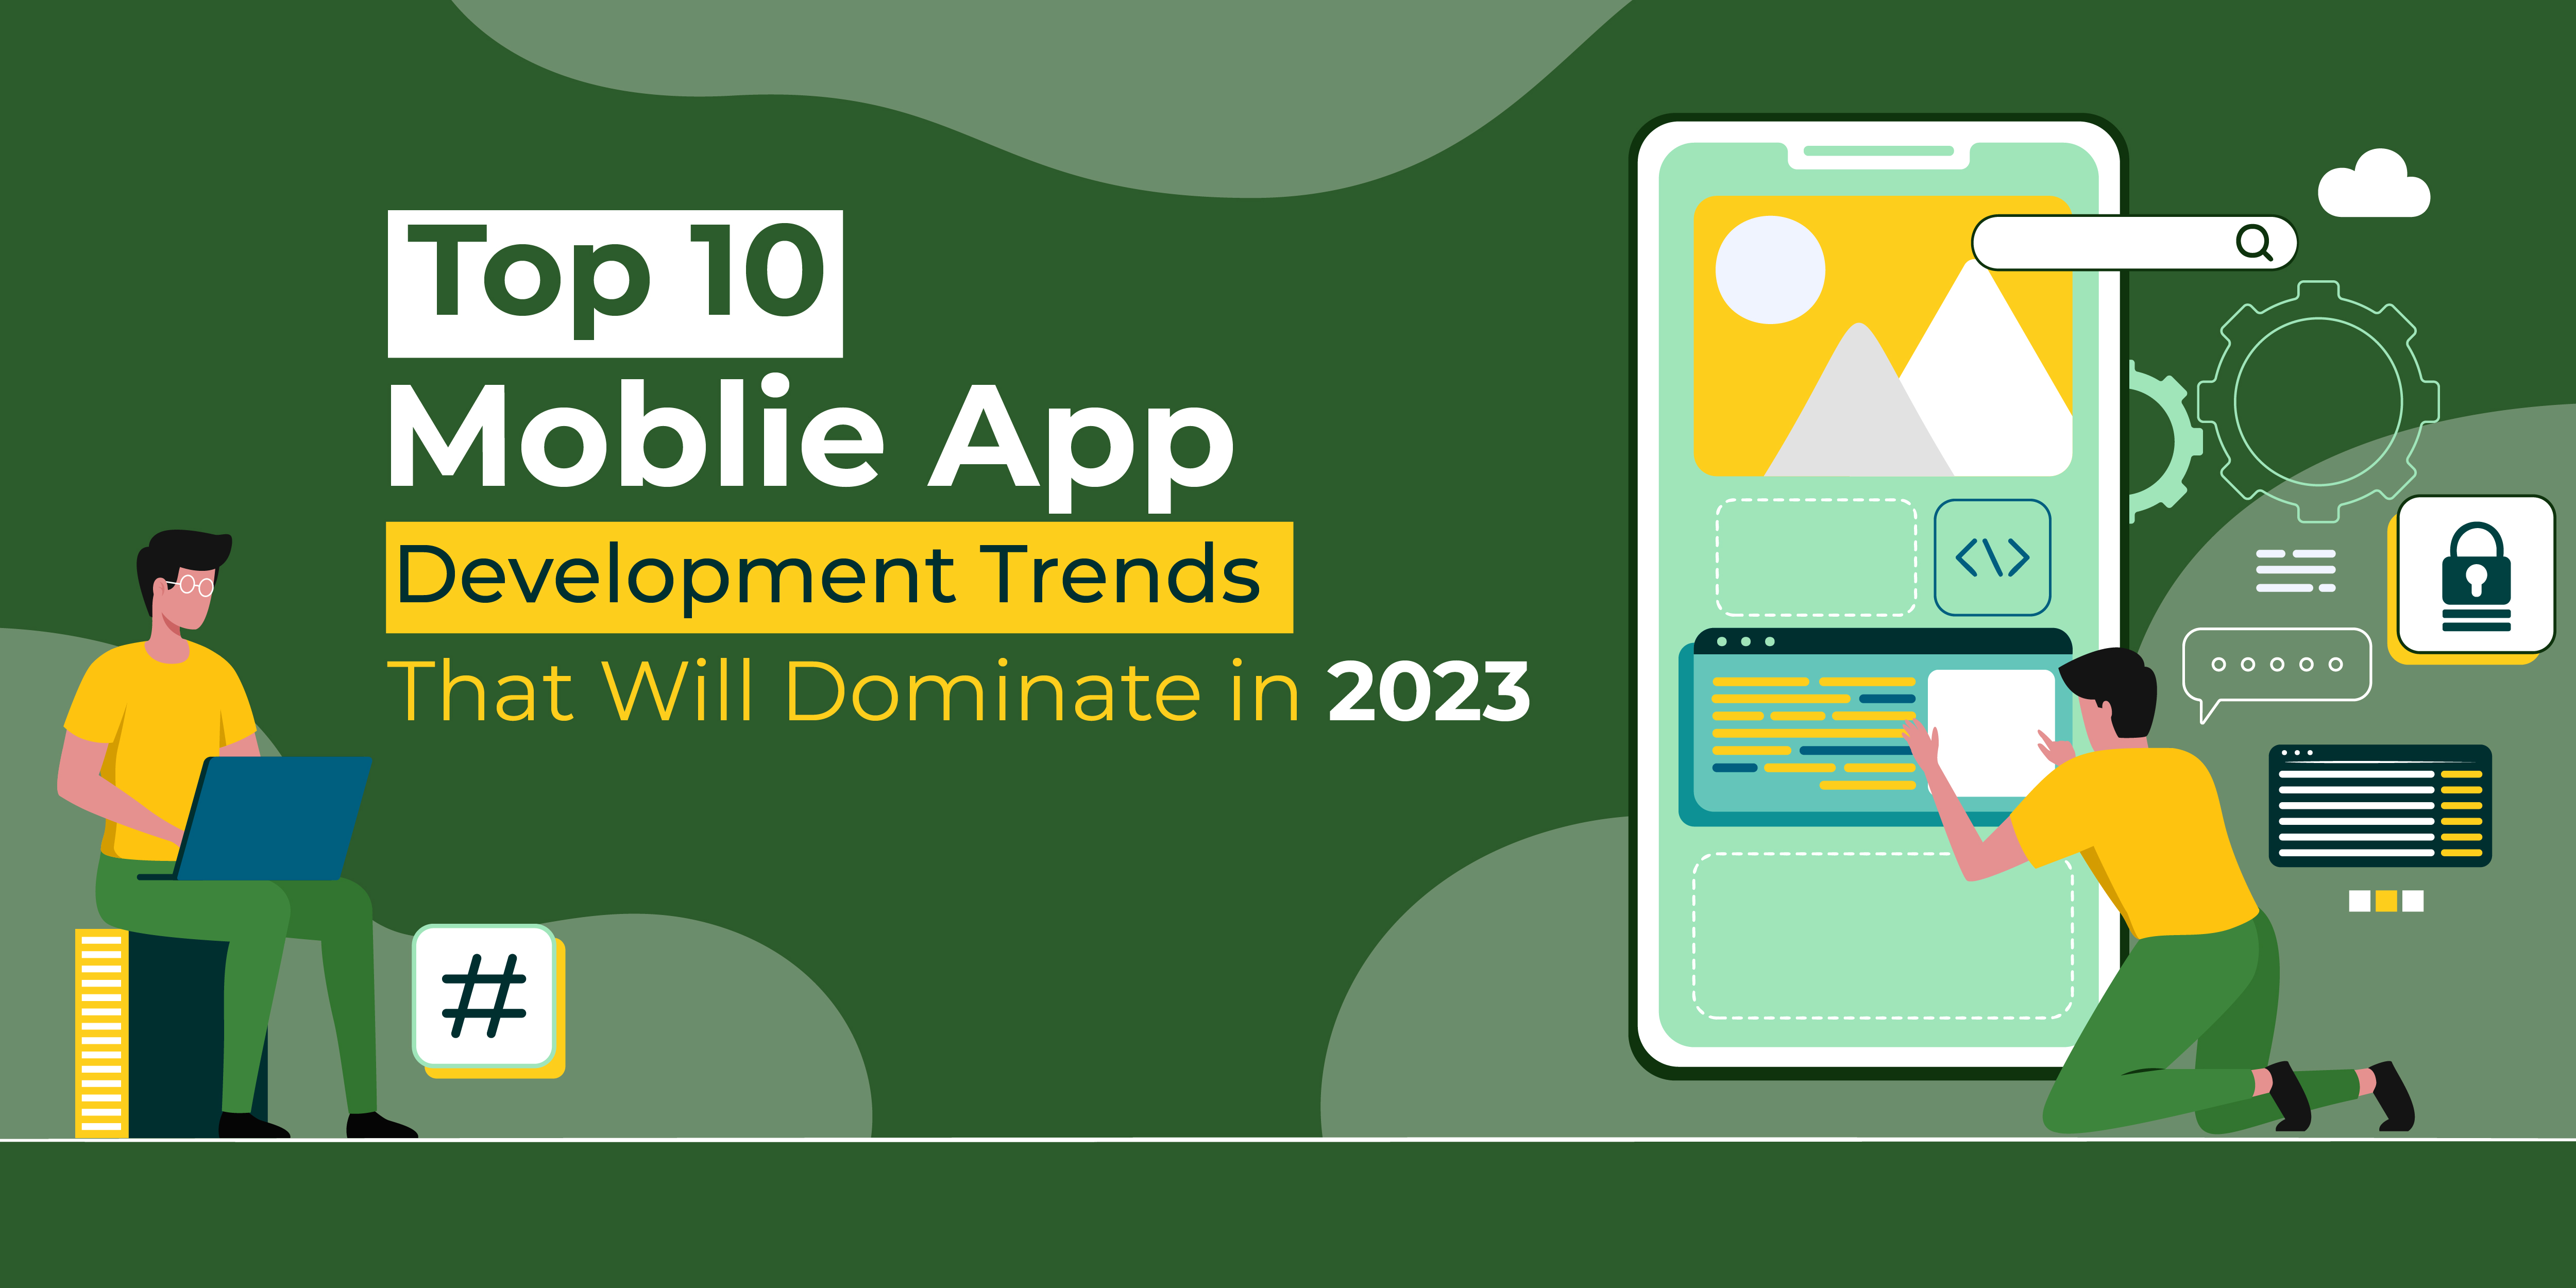 Top 10 Mobile App Development Trends That Will Dominate in 2023